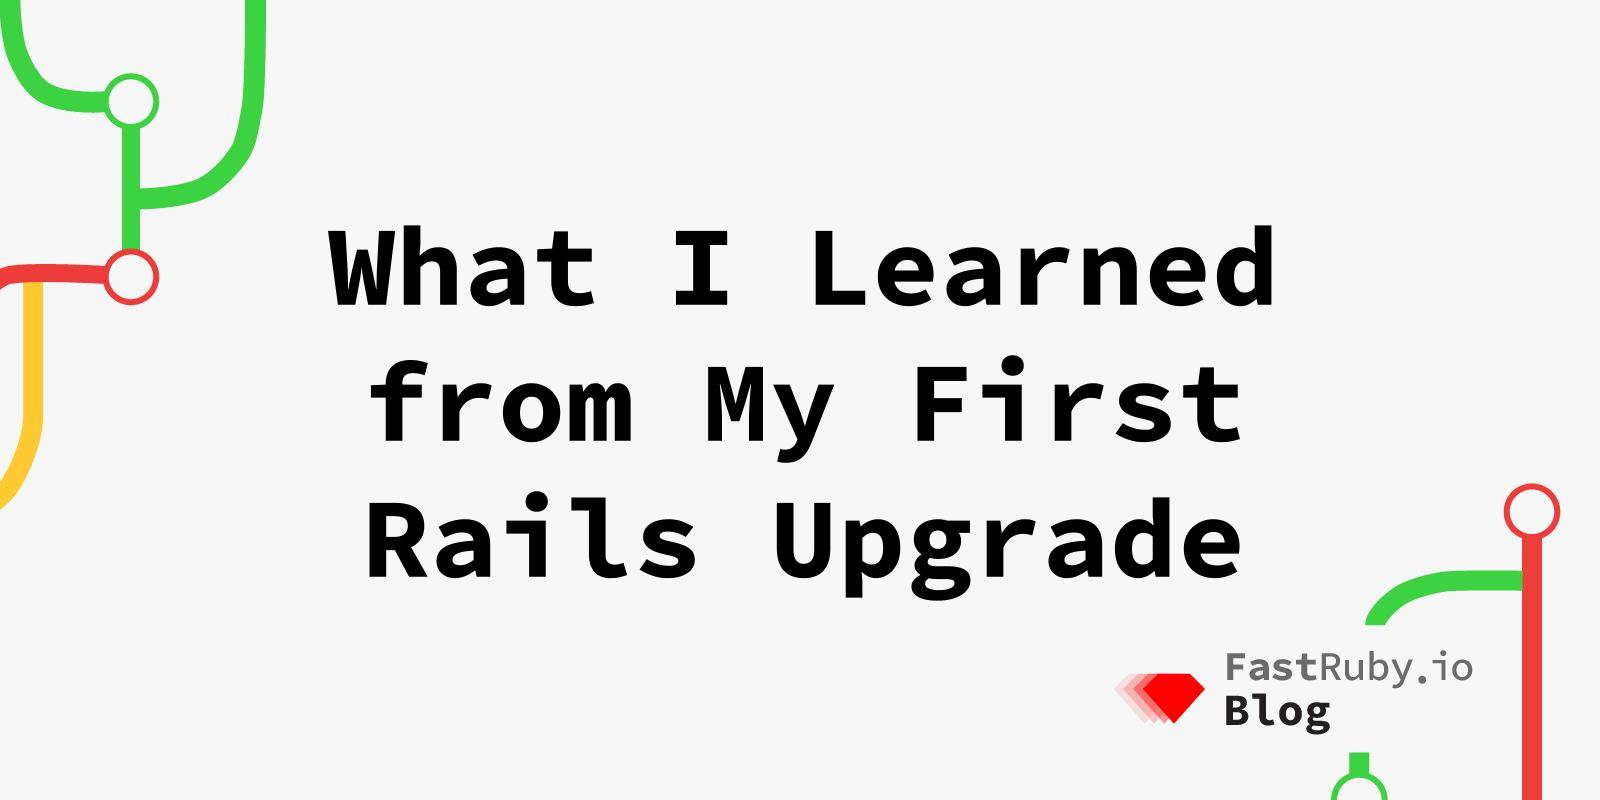 What I Learned from My First Rails Upgrade